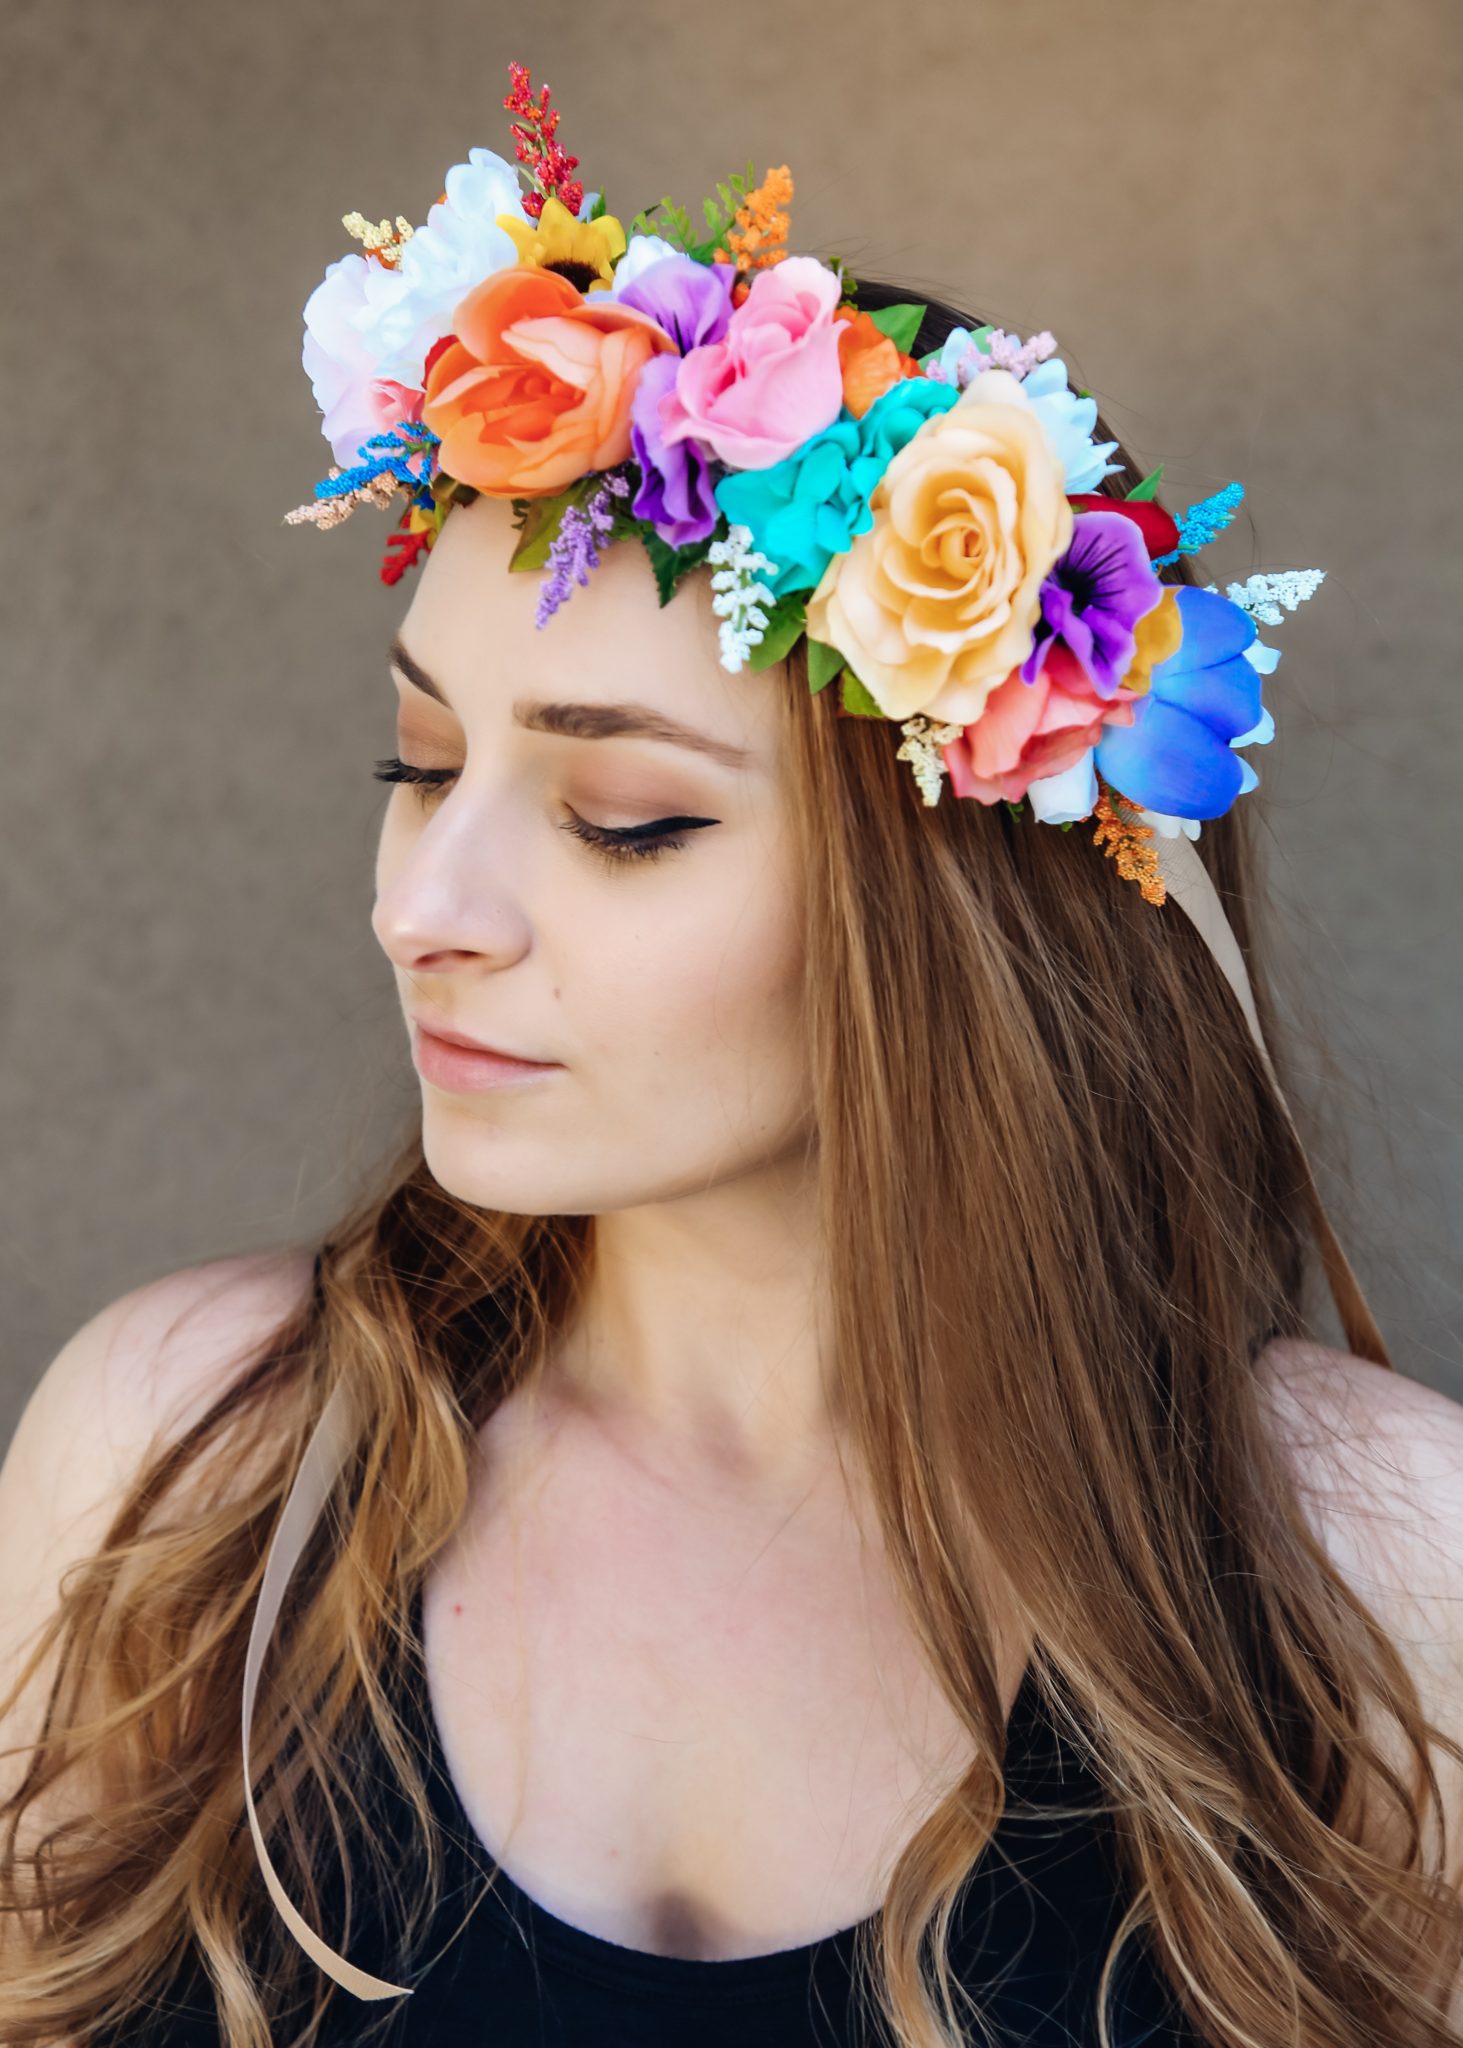 I Used To Make Flower Crowns... – rosie darch